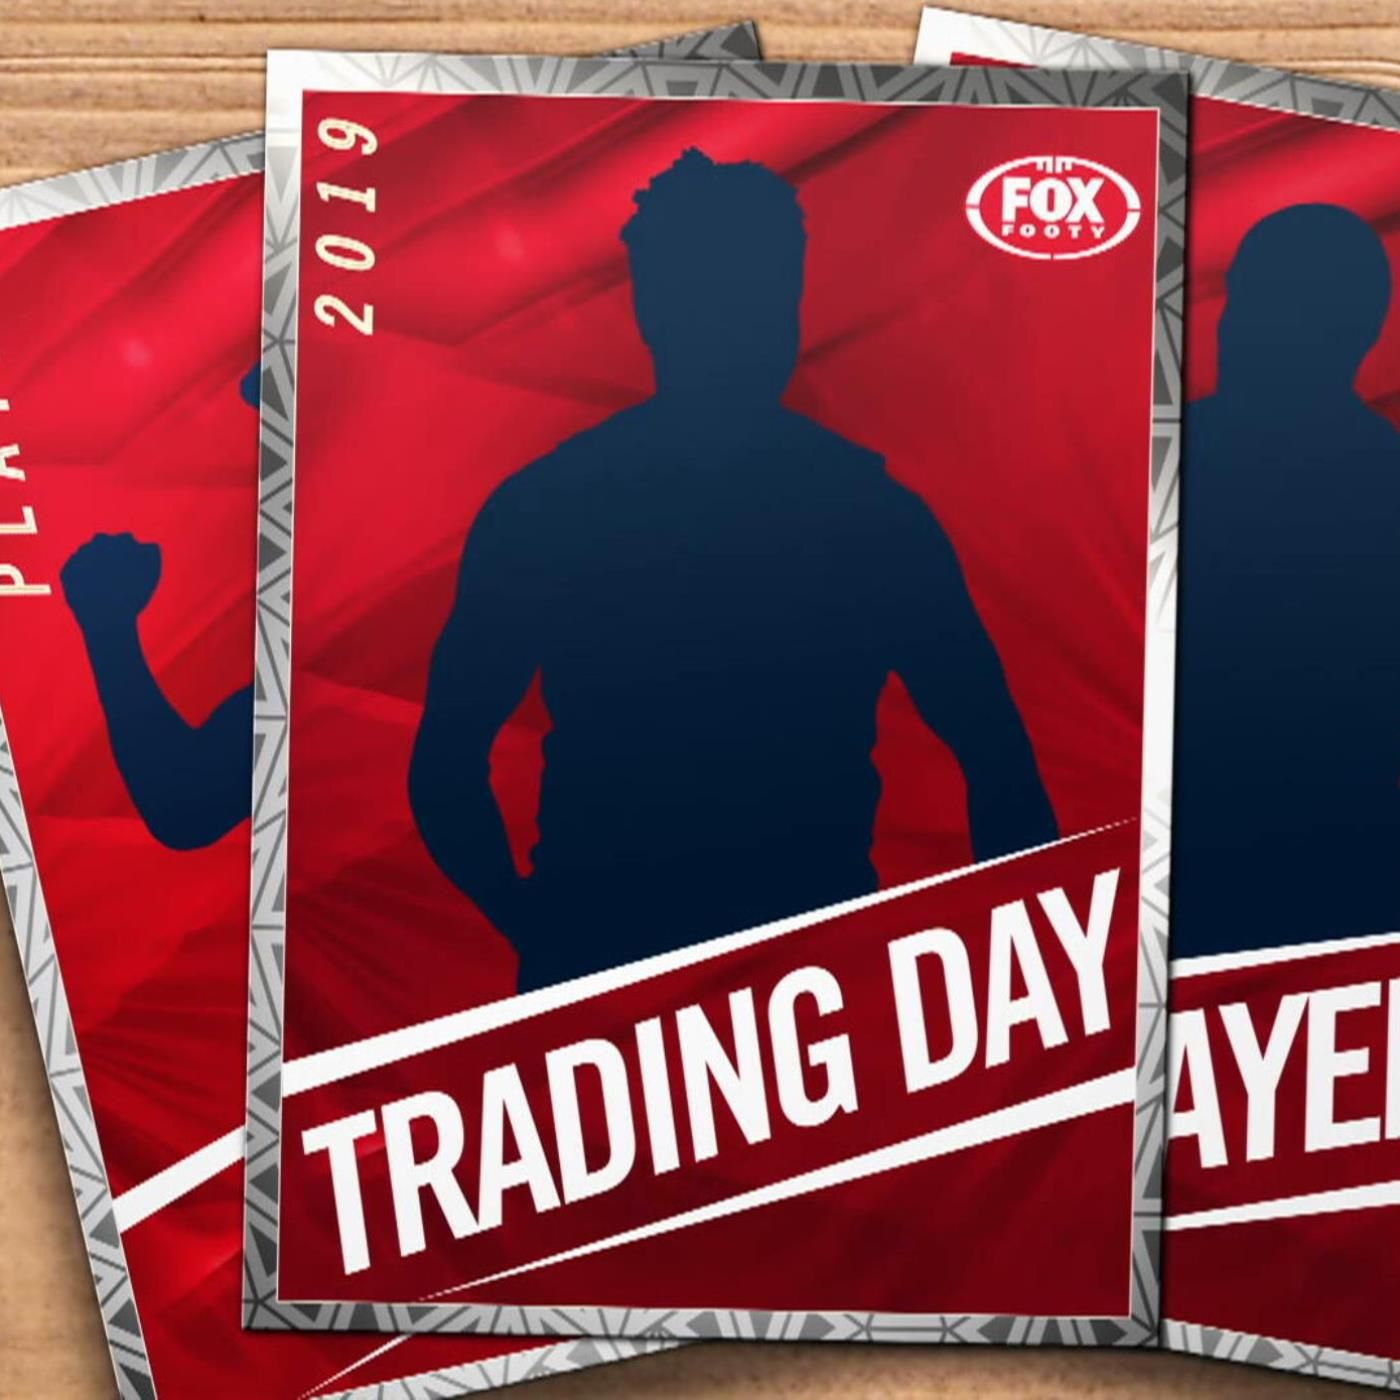 Trading Day 2/10: Dons must do Daniher, Fantasia deals | Suns wasting time on pawns